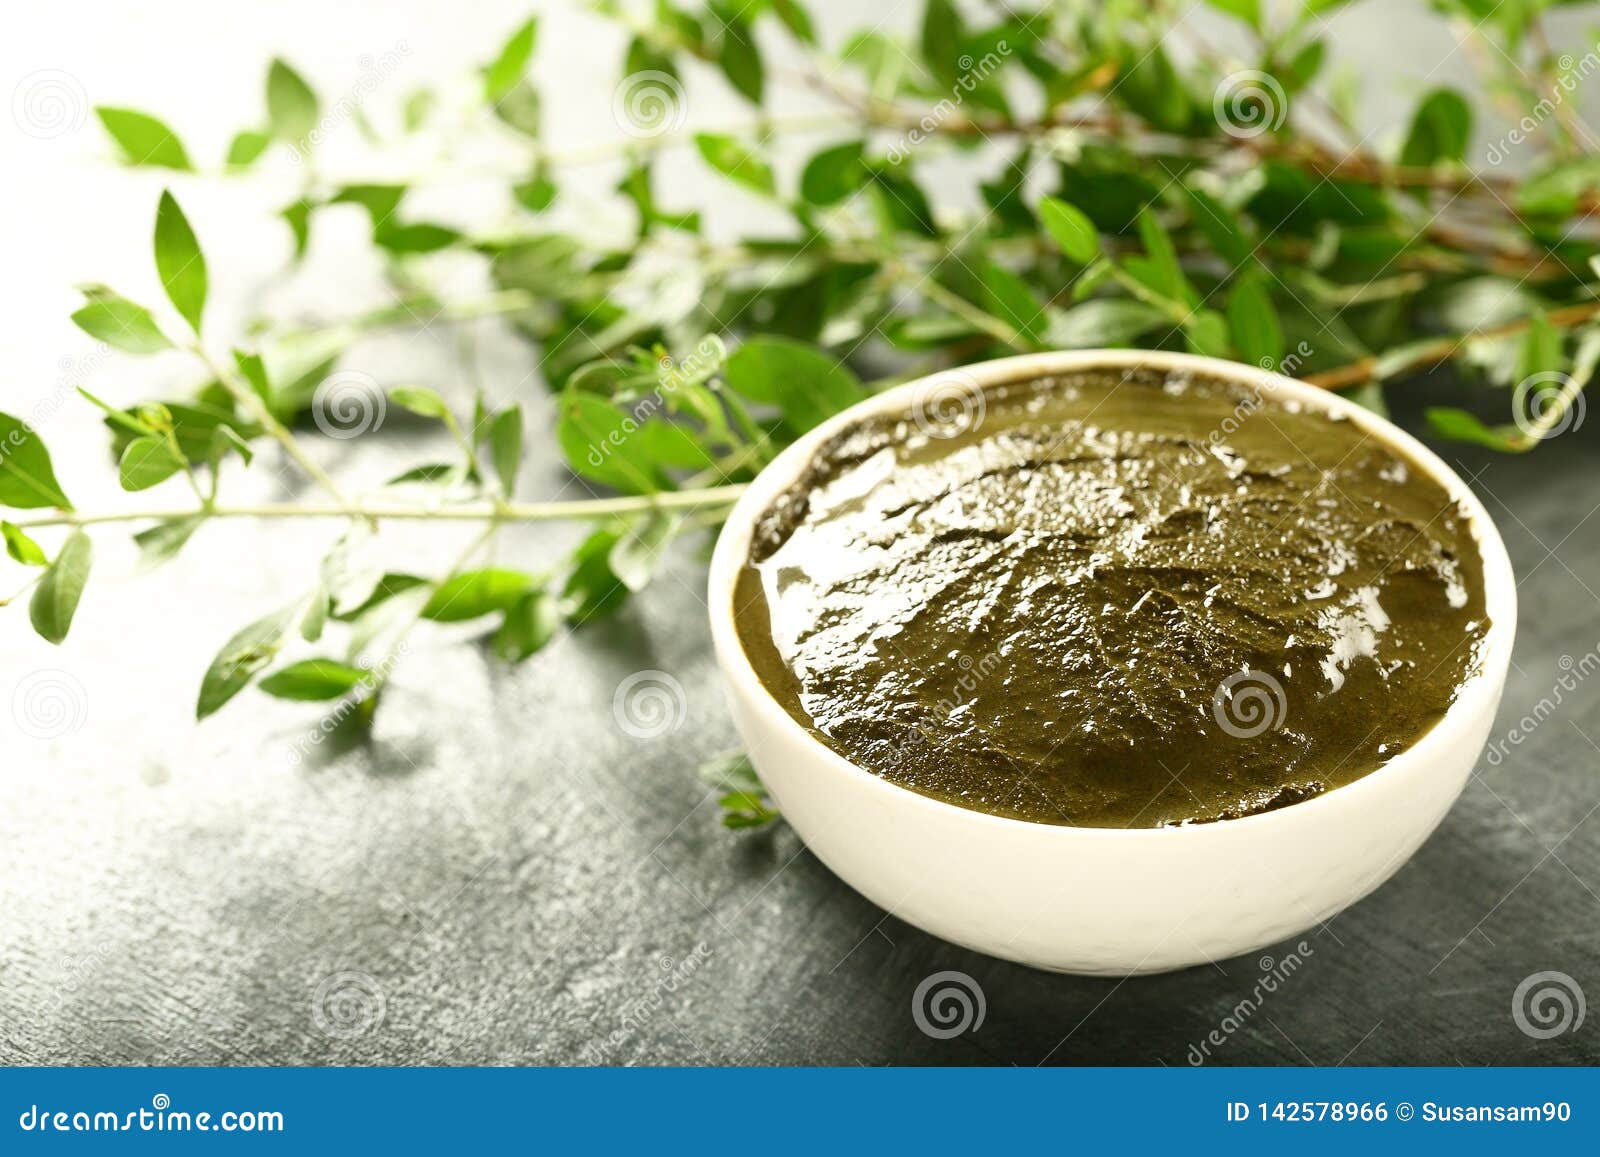 Bowl of Henna Paste Made of Lowsonia Leaves Stock Photo - Image of hair,  design: 142578966